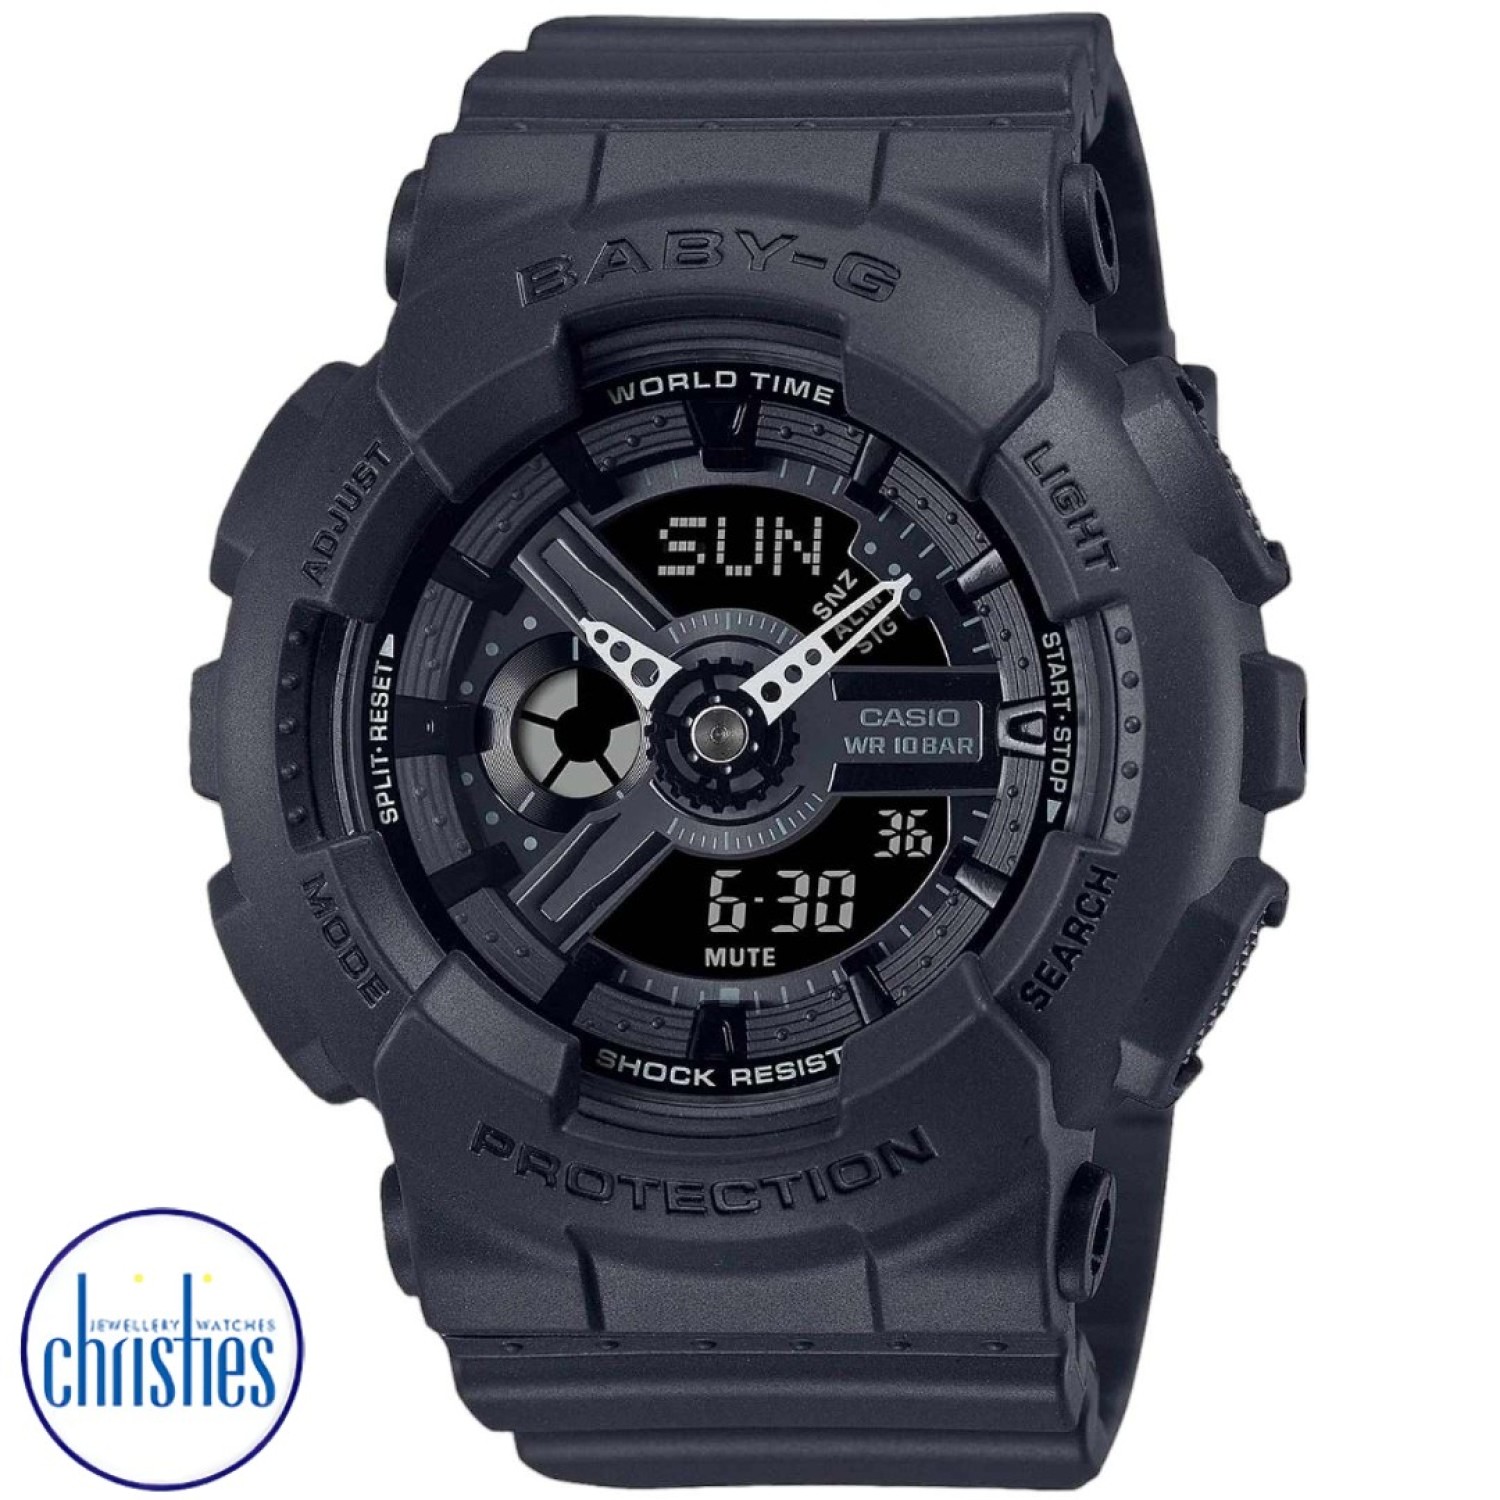 BA110XBC-1A Casio BABY-G Ana-Digi Watch. Slip on a splash of clean, fresh colour with an eye-catcher inspired by the popular design of the G-SHOCK GA-110. Baby-G watches price